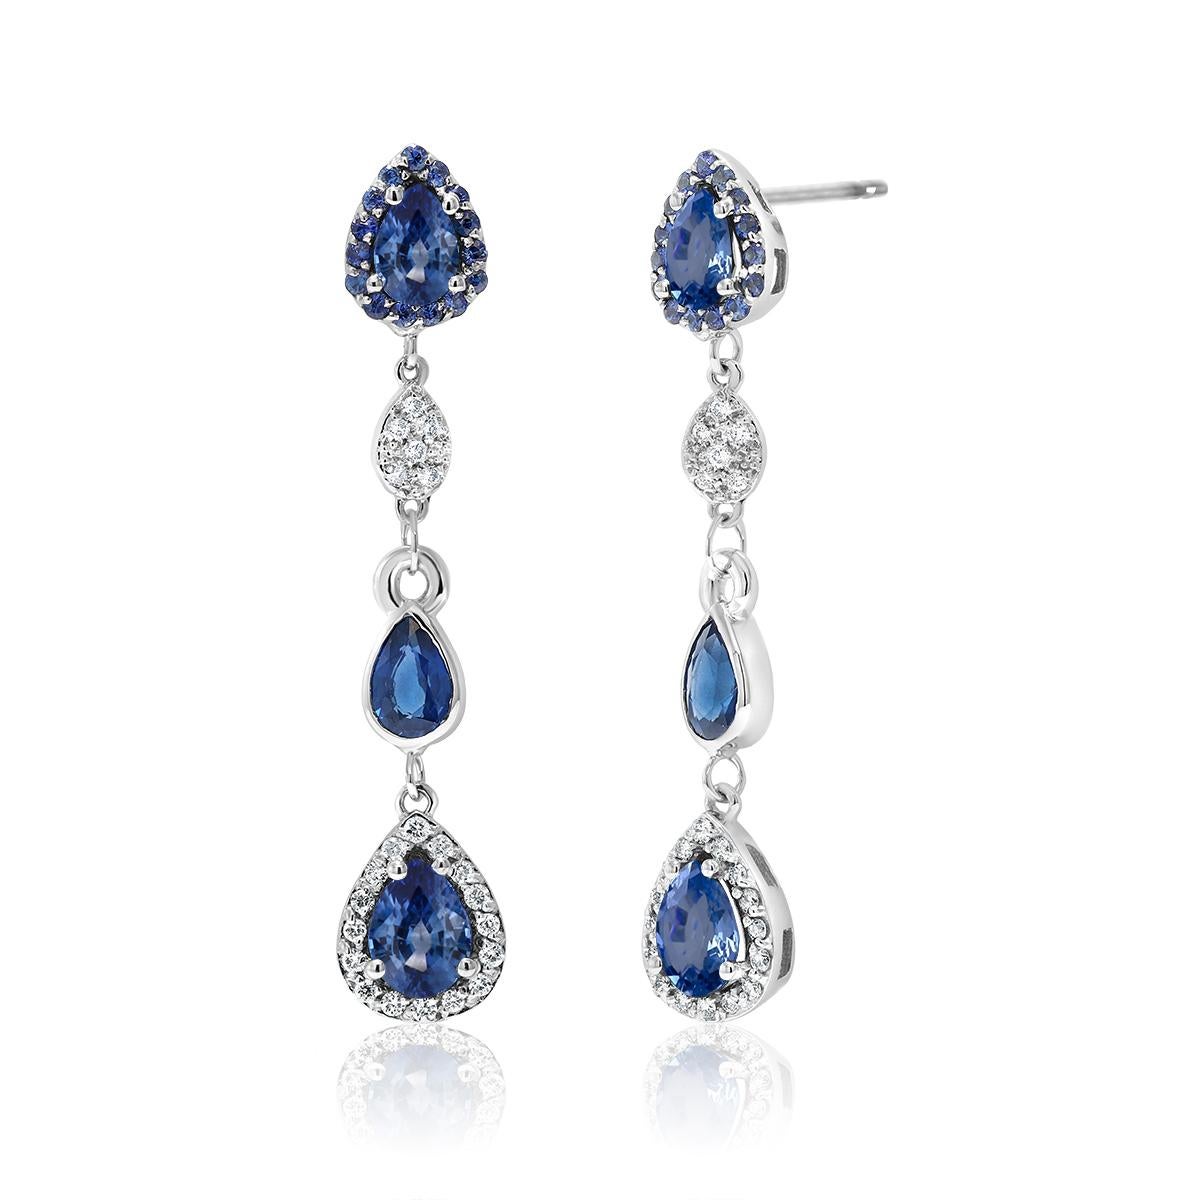 Contemporary Diamond Earrings with Pear Shape Sapphire Drops Weighing 4.90 Carat